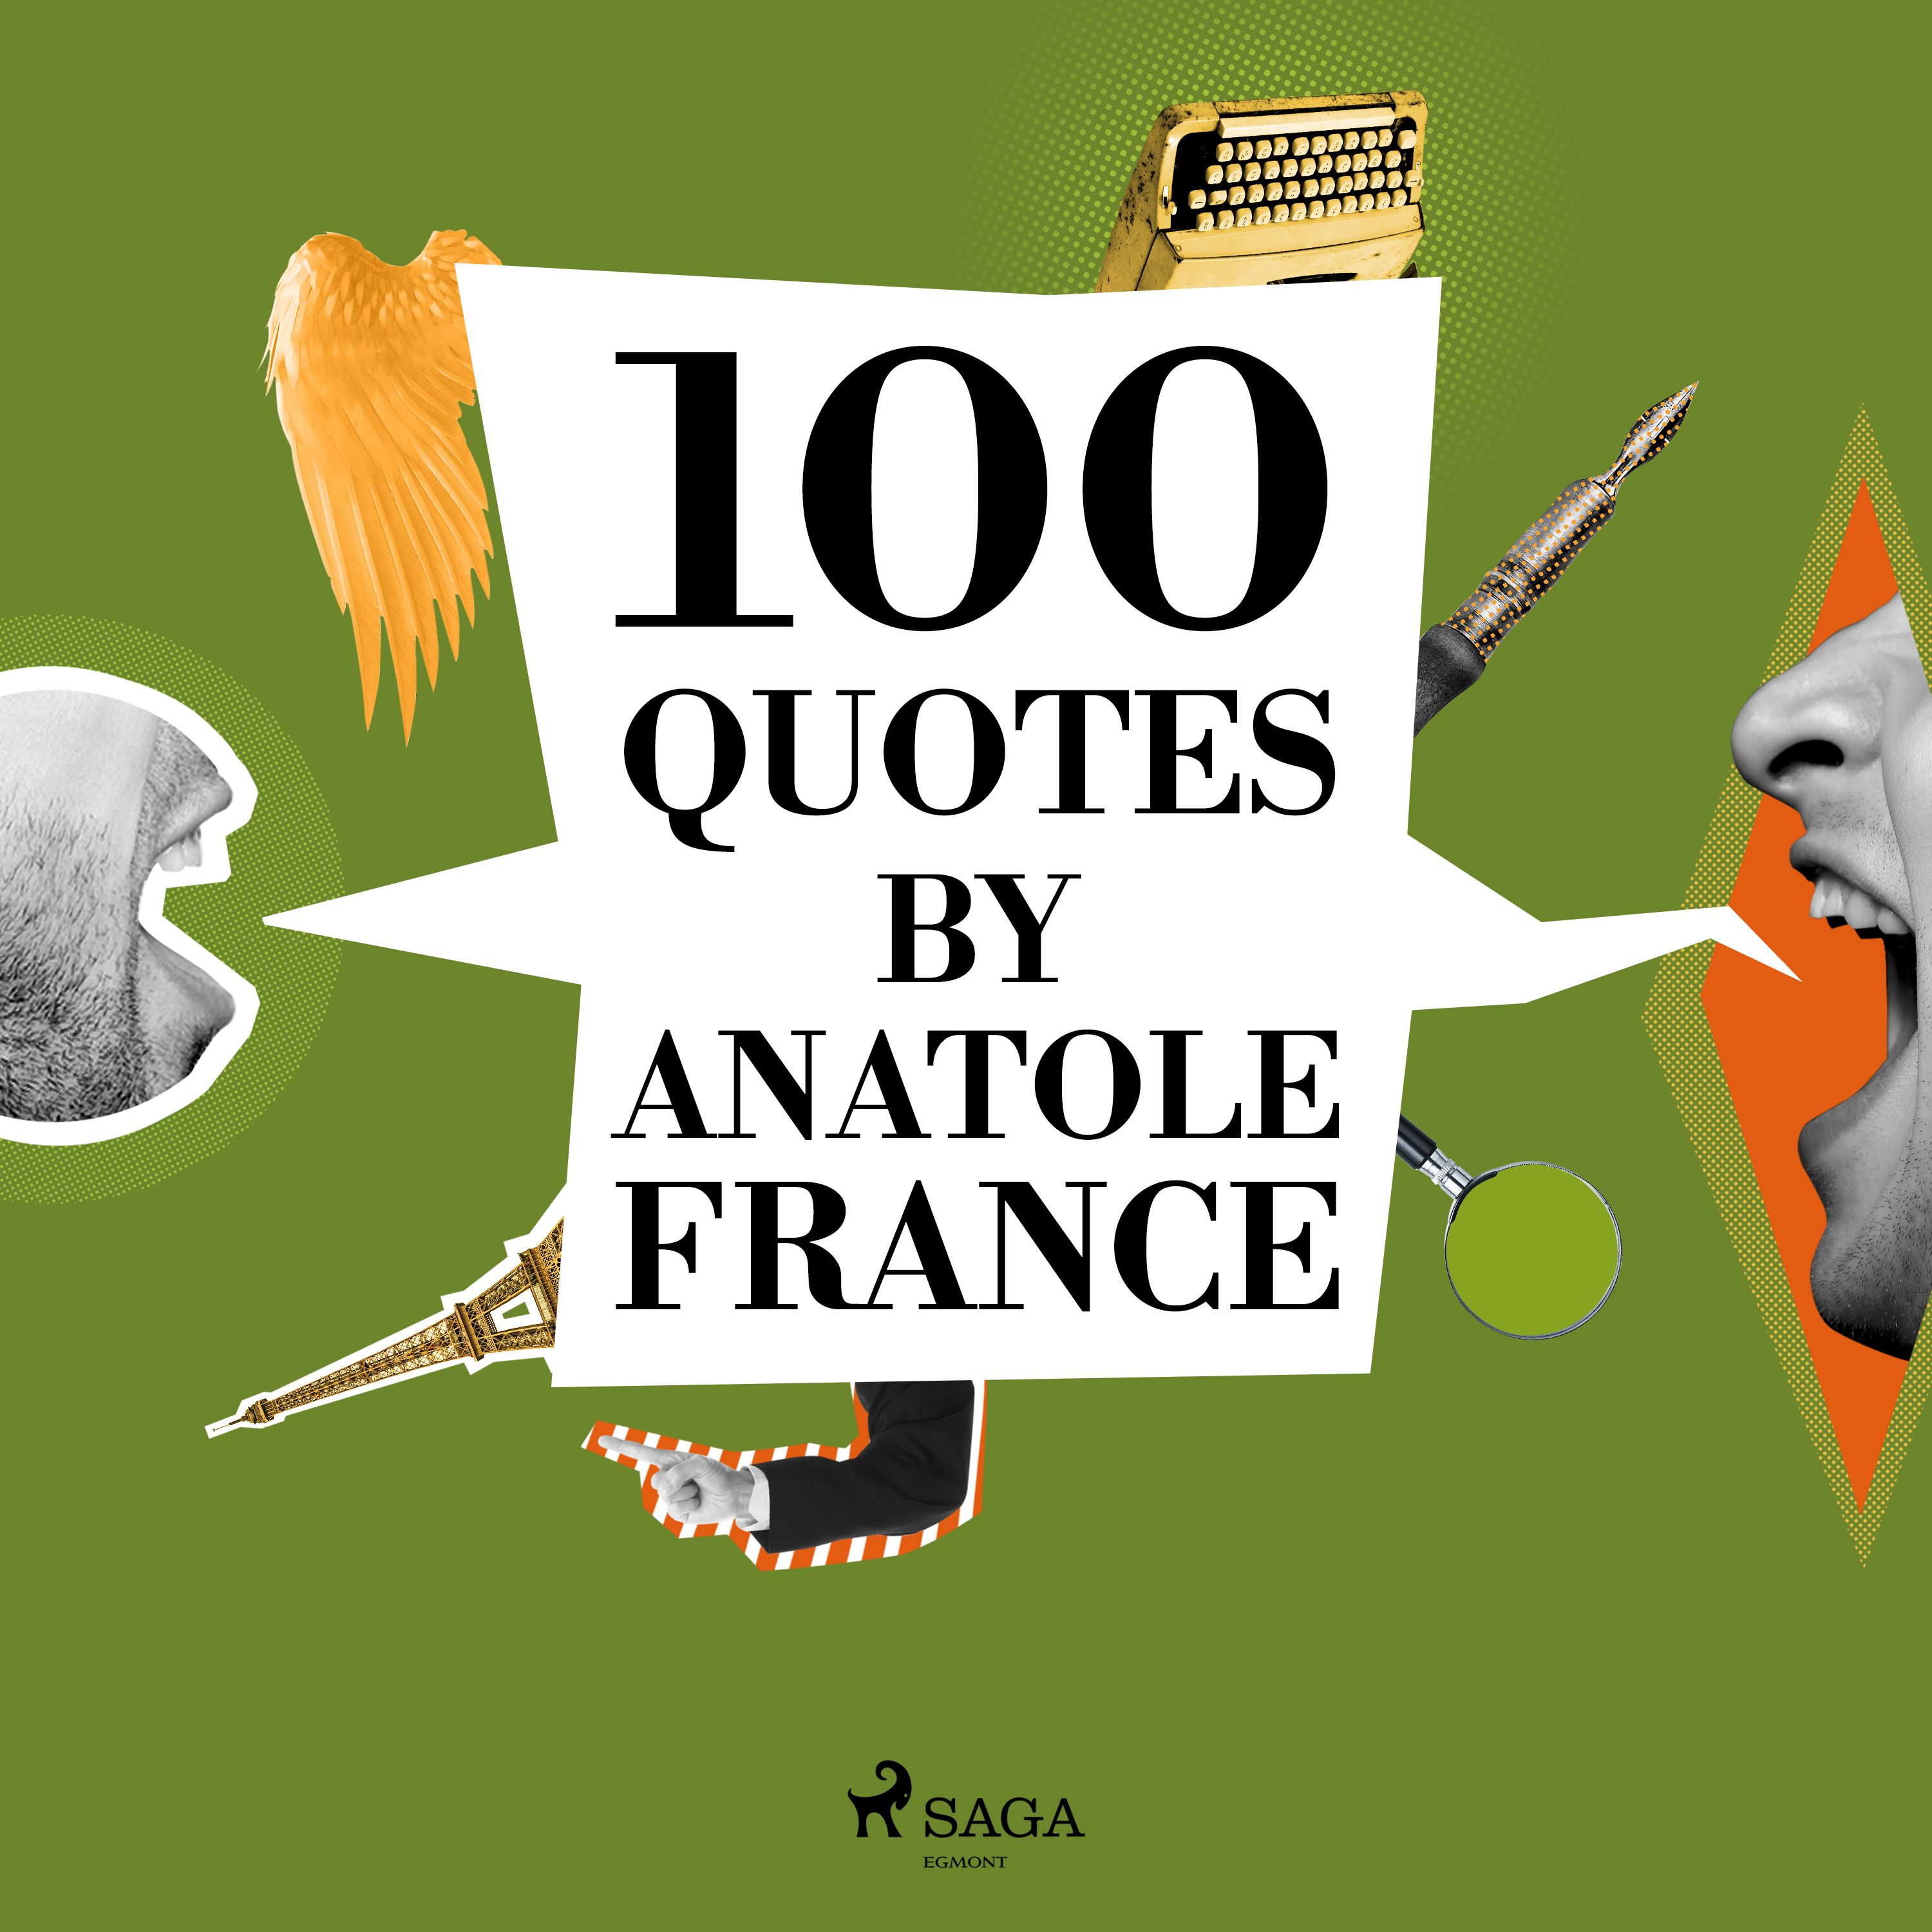 100 Quotes by Anatole France, audiobook by Ambrose Bierce